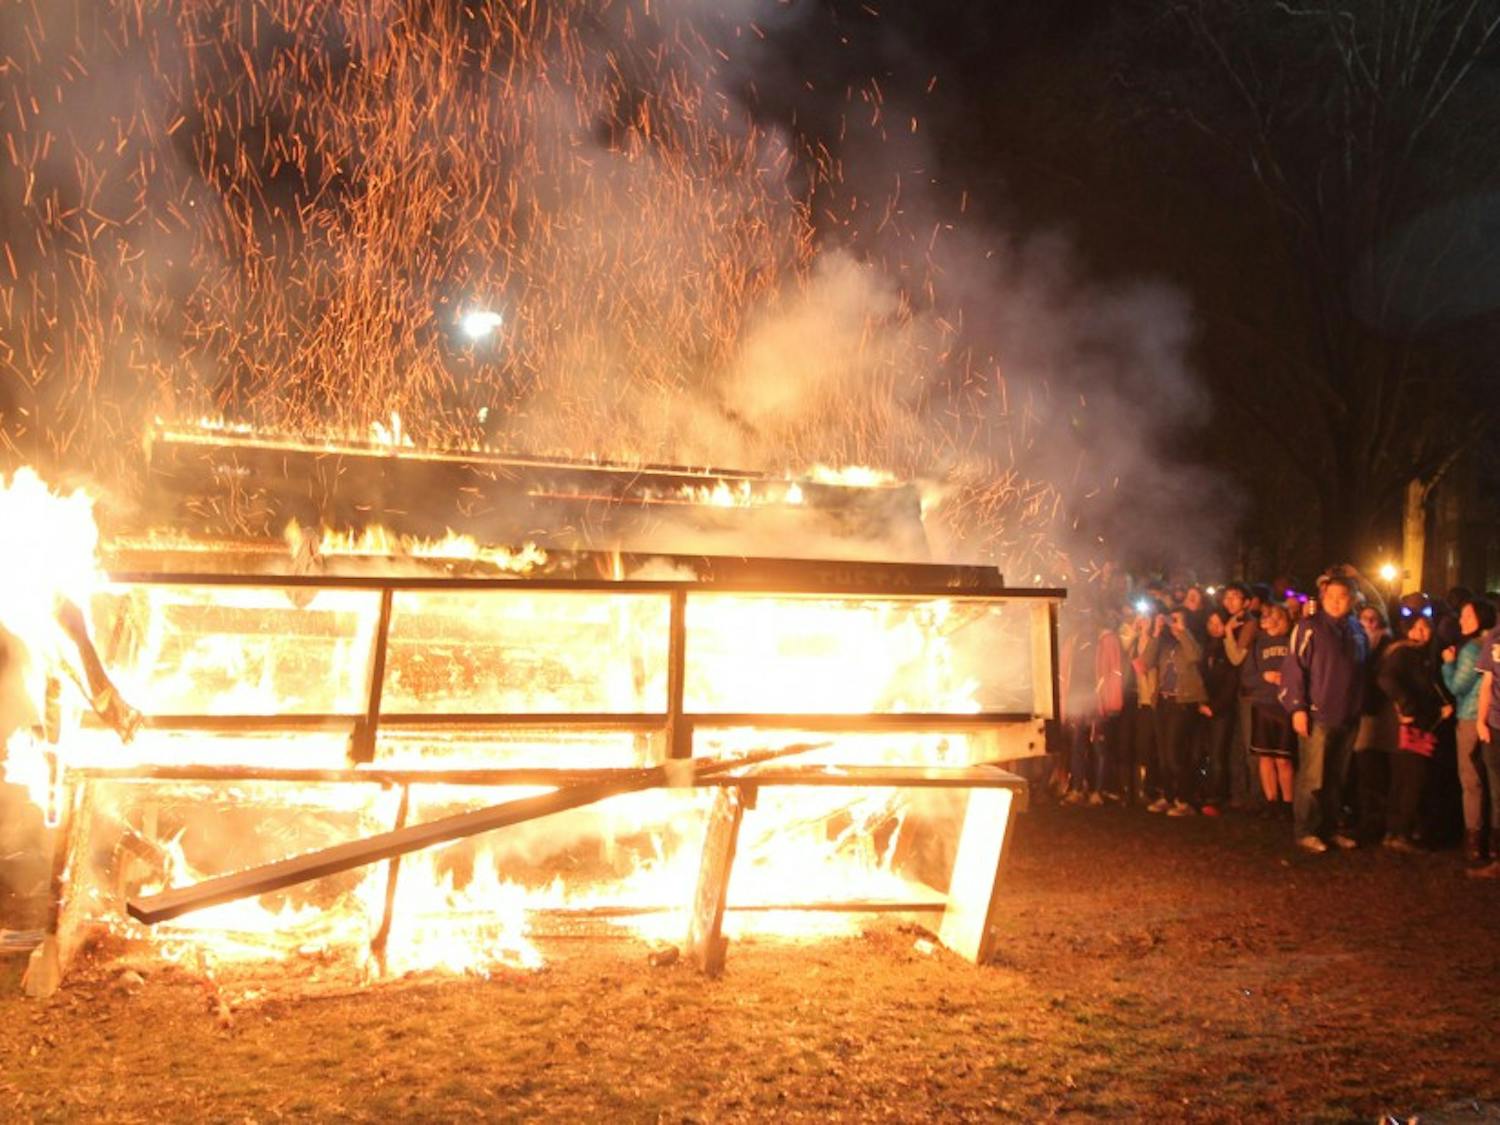 Duke students celebrate a win by burning benches on the Main West Quadrangle.